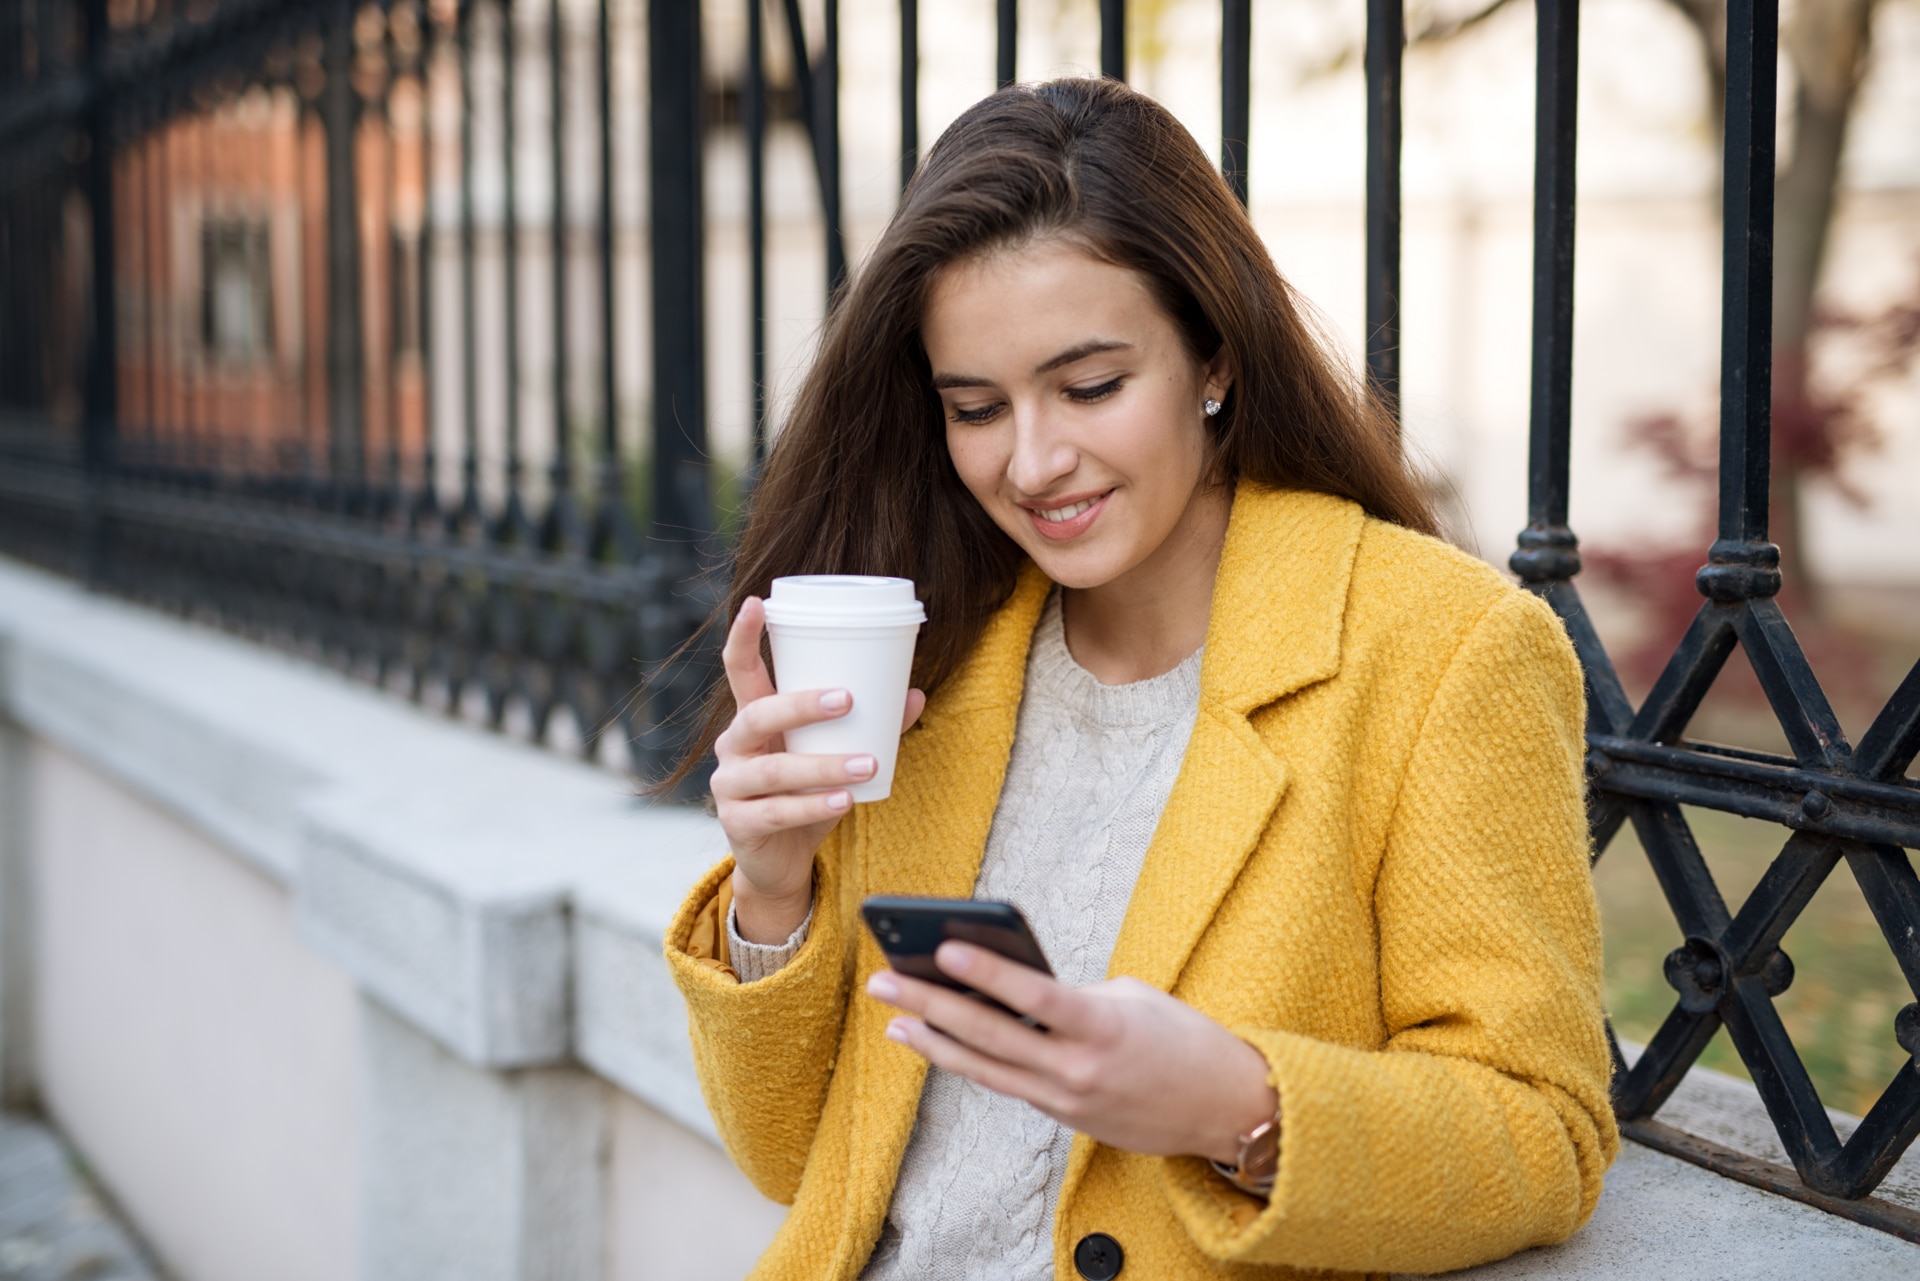 Smiling woman using mobile and drinking coffee